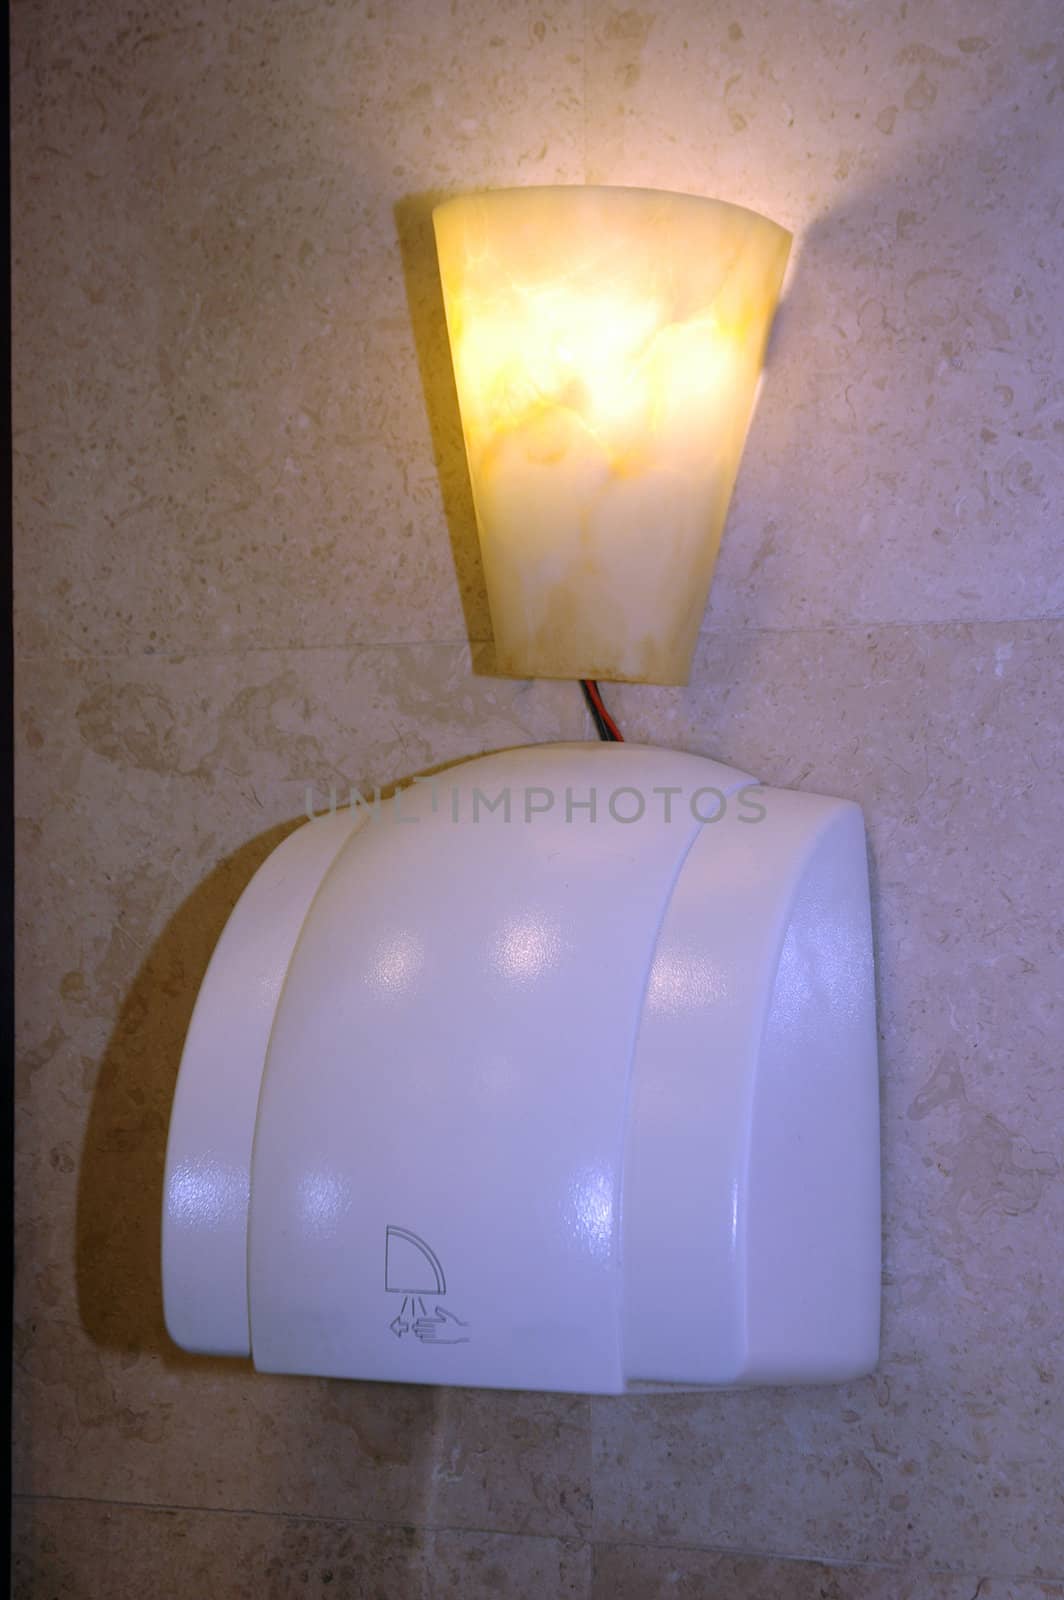 hand dryer on the wall at washrom by antonihalim